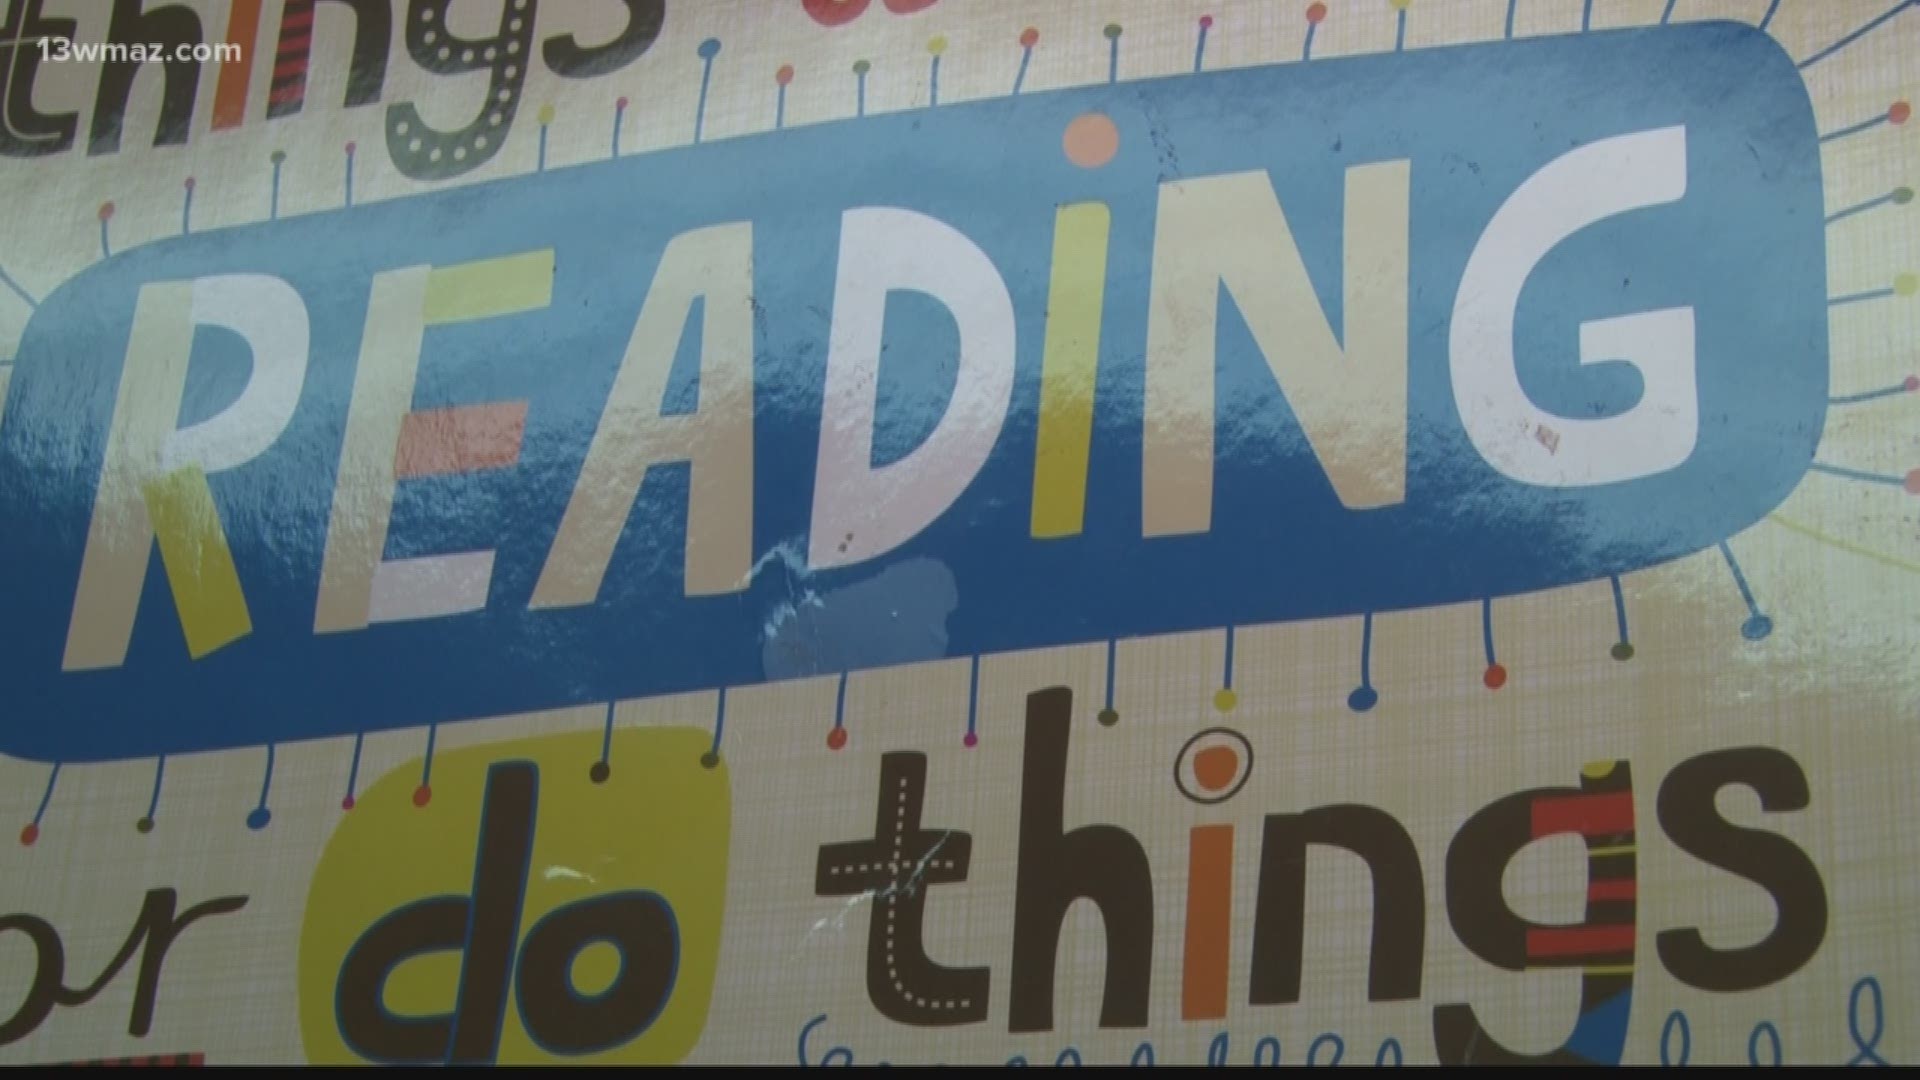 Georgia Milestones test results are in, and Bibb County Schools are seeing improvements with its reading levels.